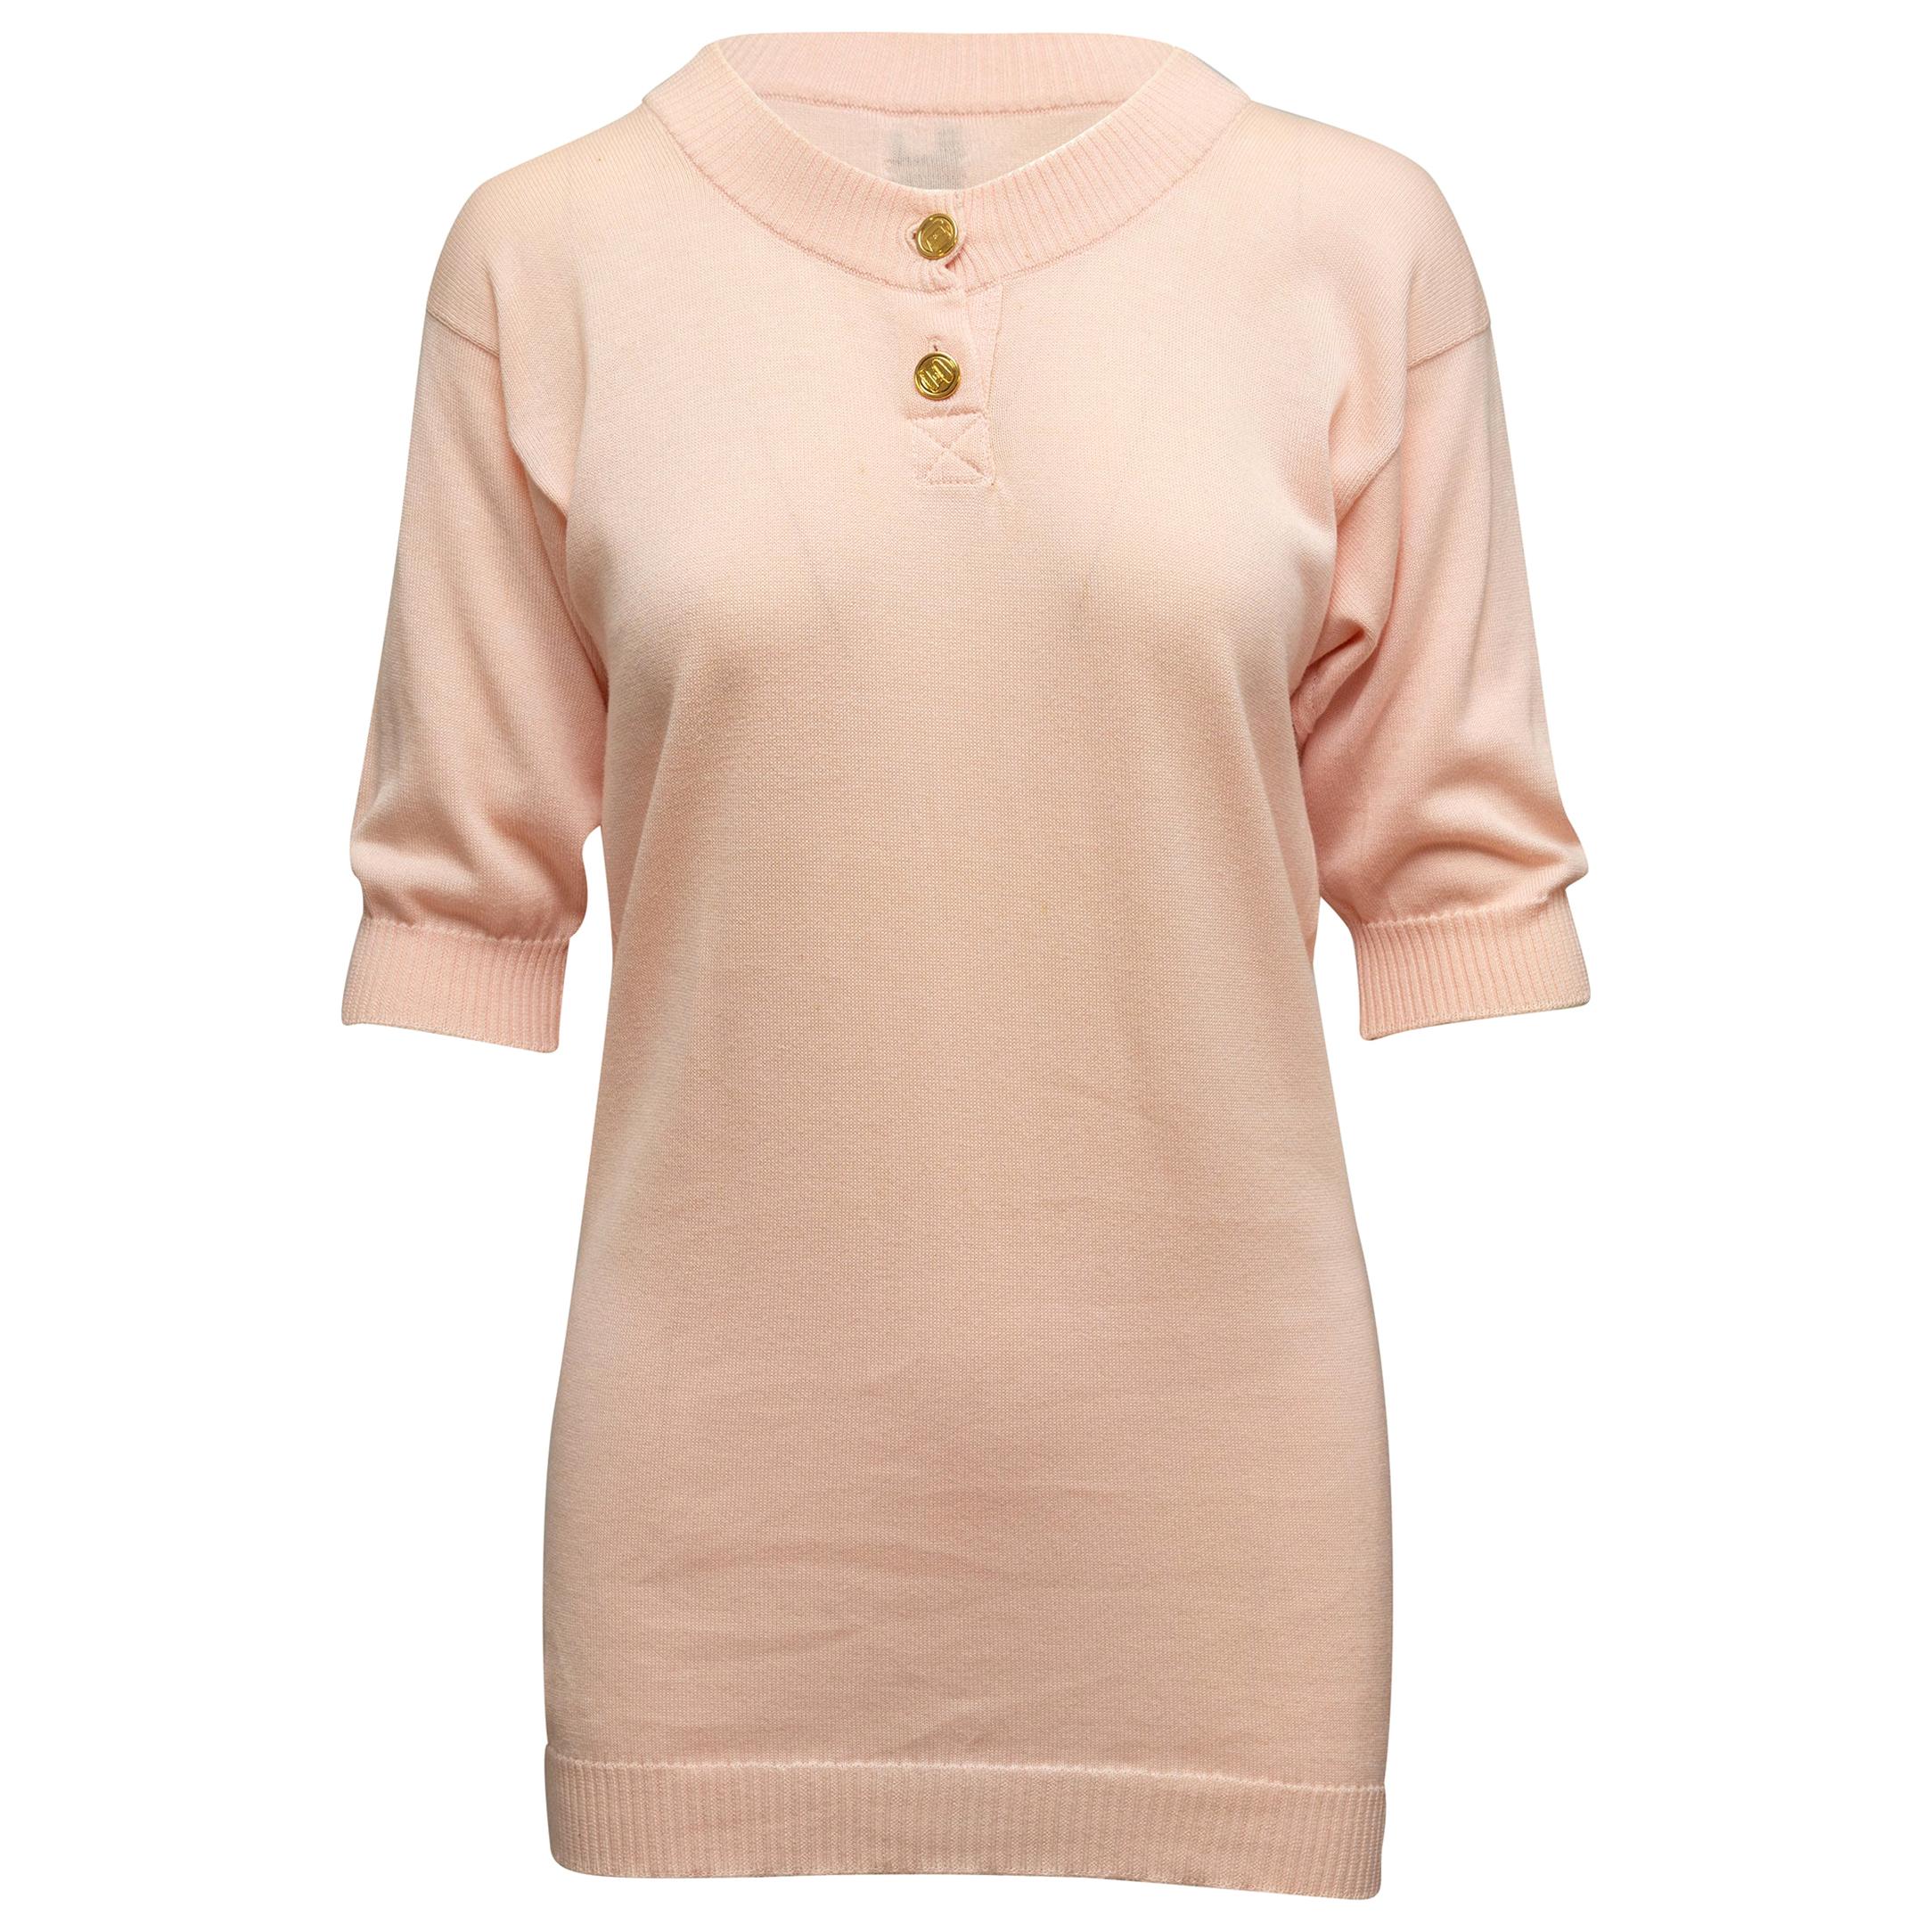 Chanel Boutique Light Pink Short Sleeve Sweater